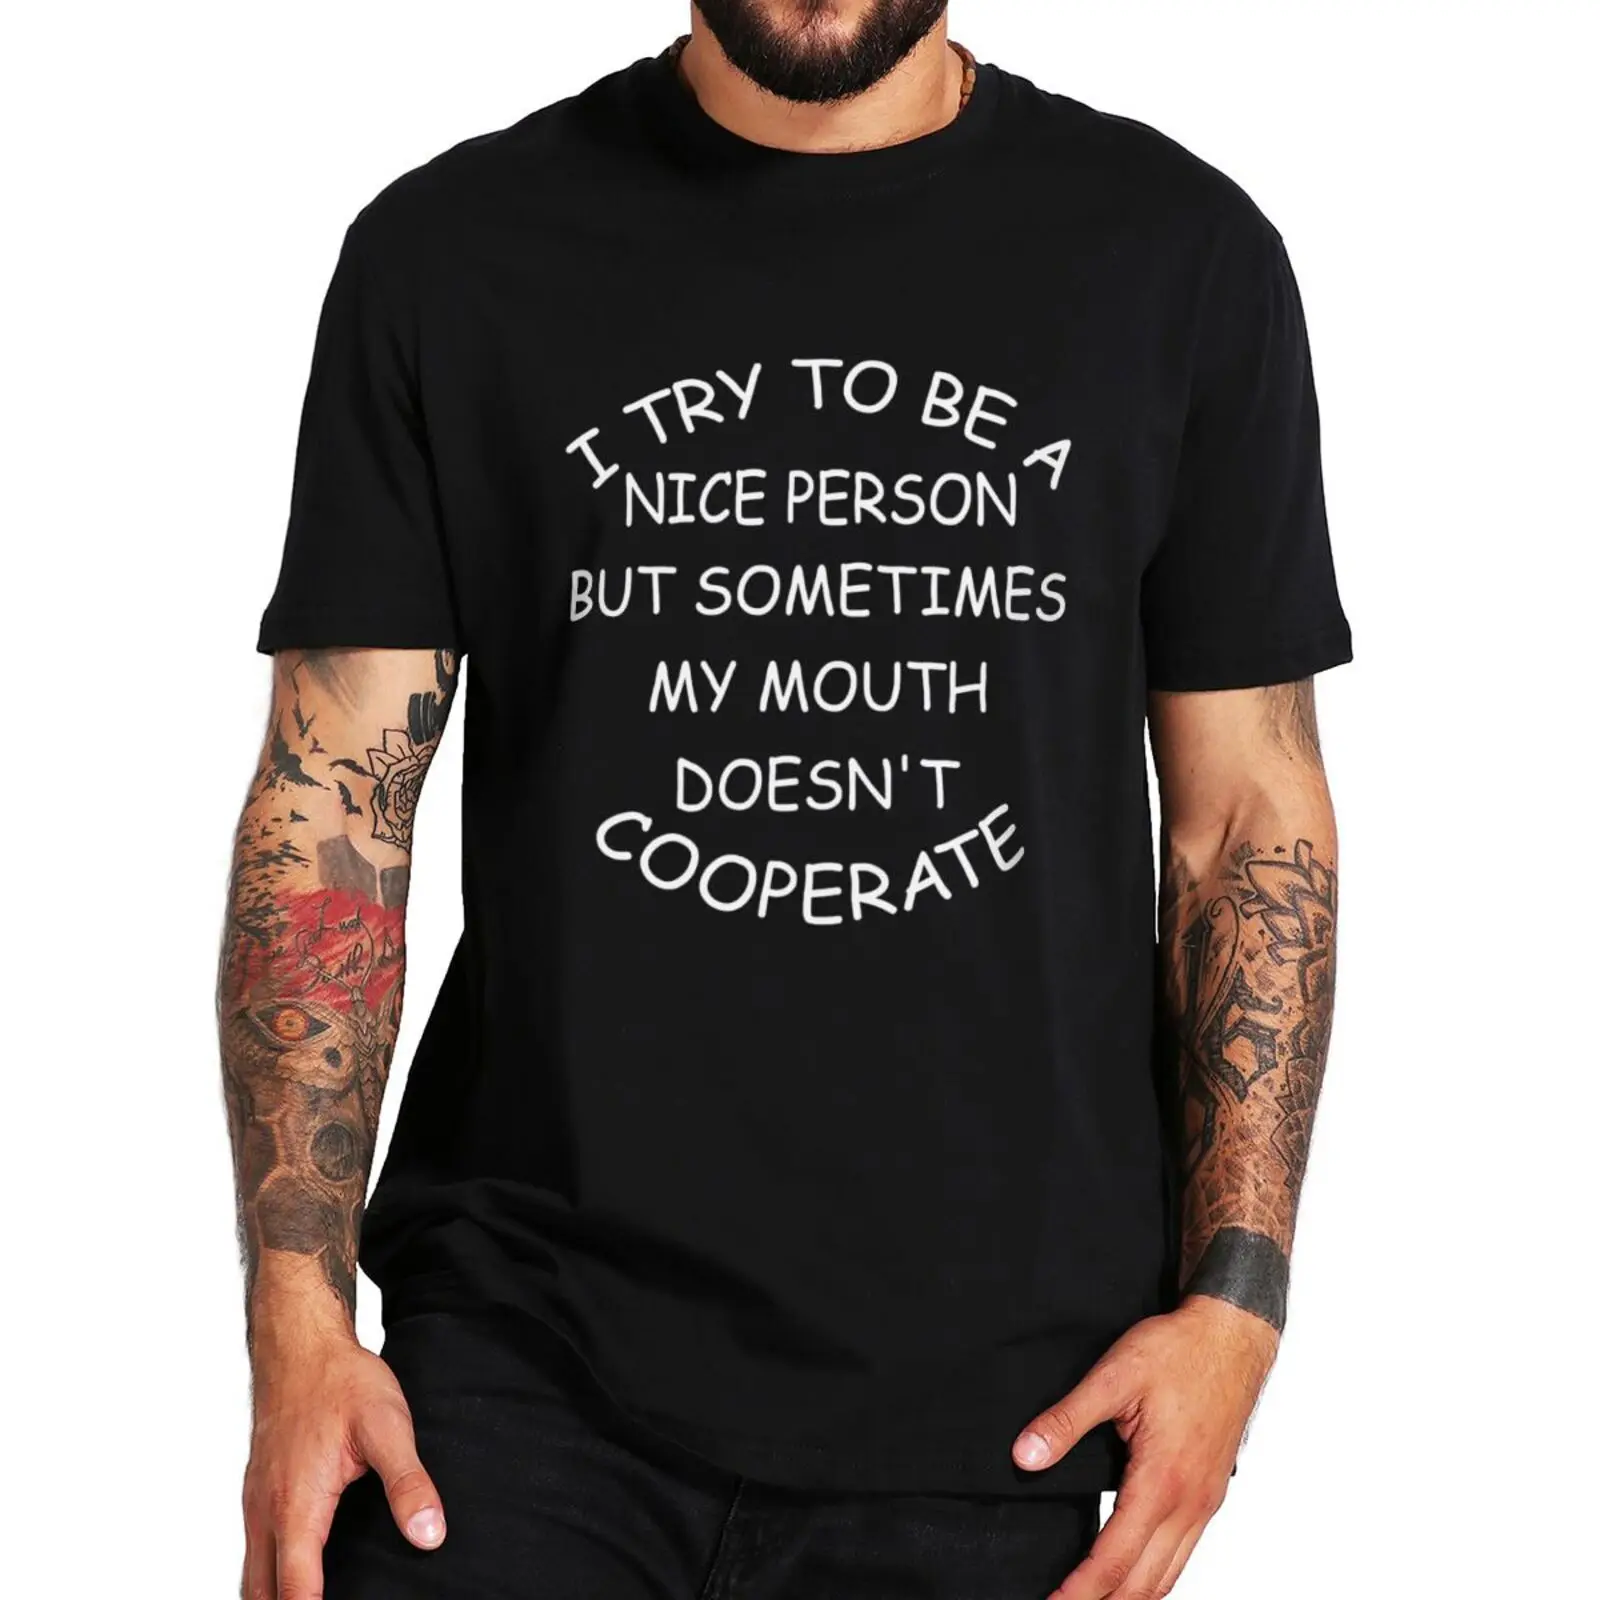 

I Try To Be A Nice Person T Shirt Funny Sayings Humor Gift Short Sleeve 100% Cotton Unisex Oversized Casual T-shirts EU Size